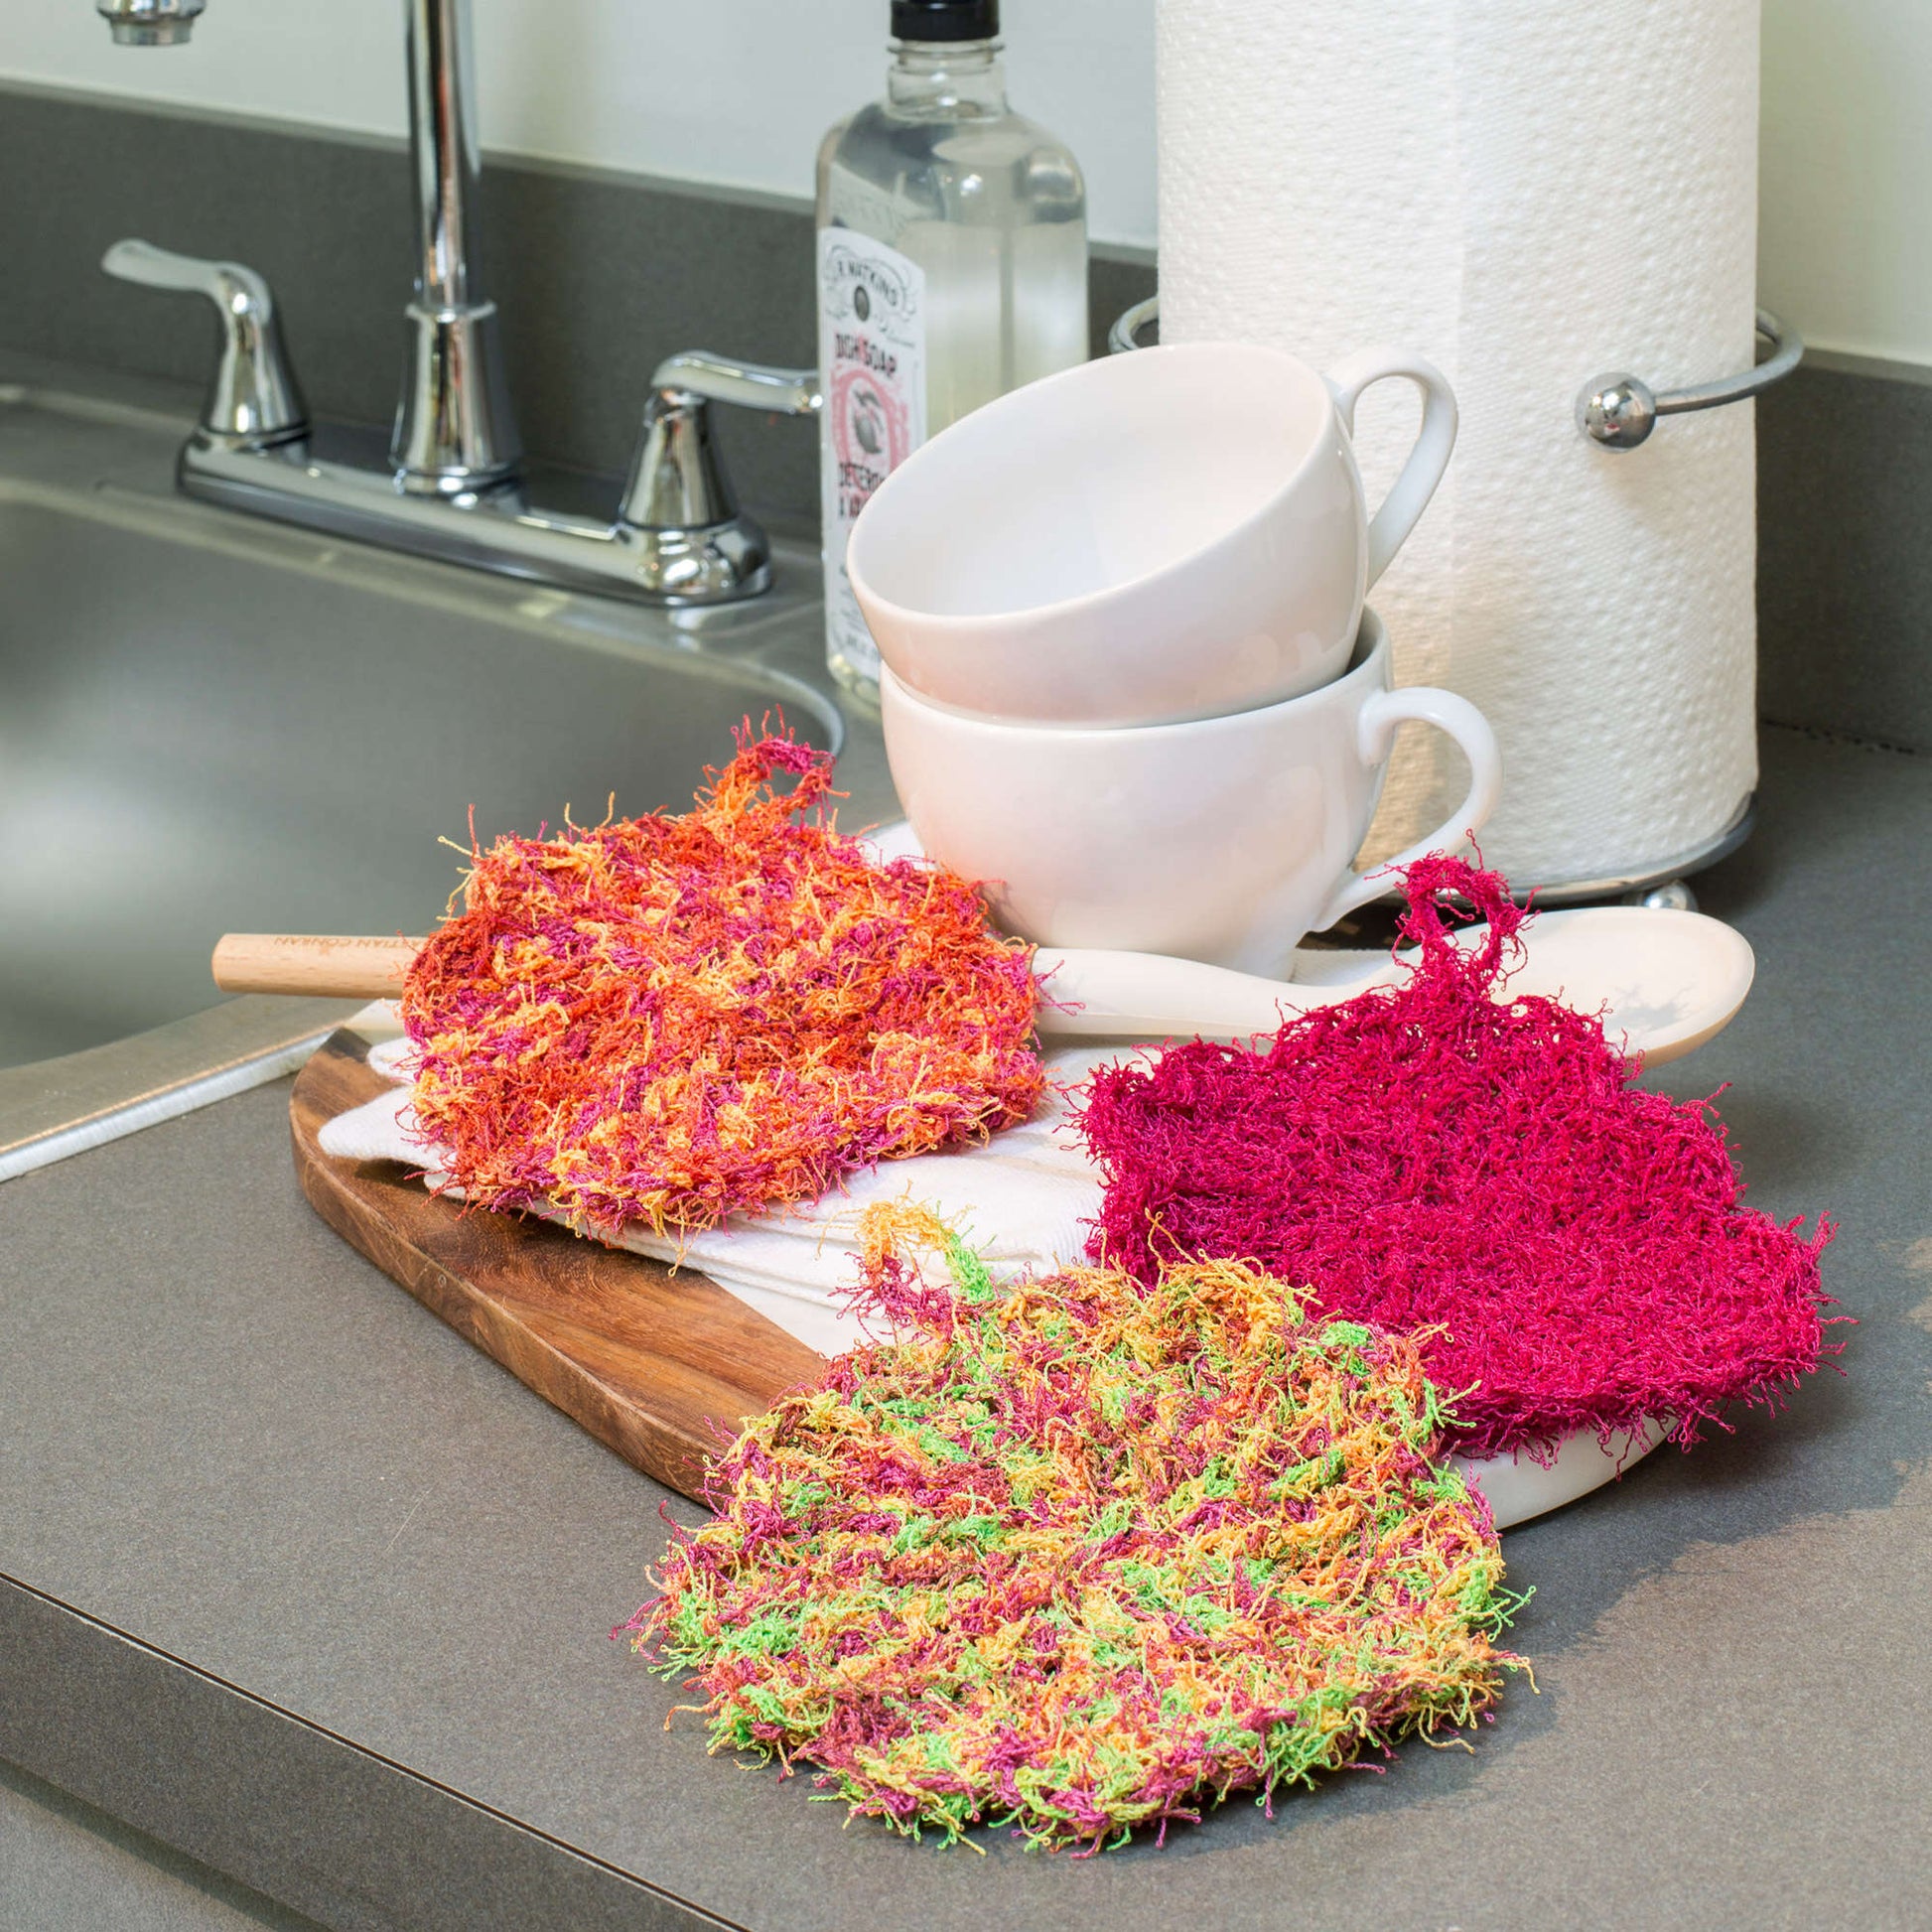 Free Red Heart Scalloped Edge Scrubby Pattern